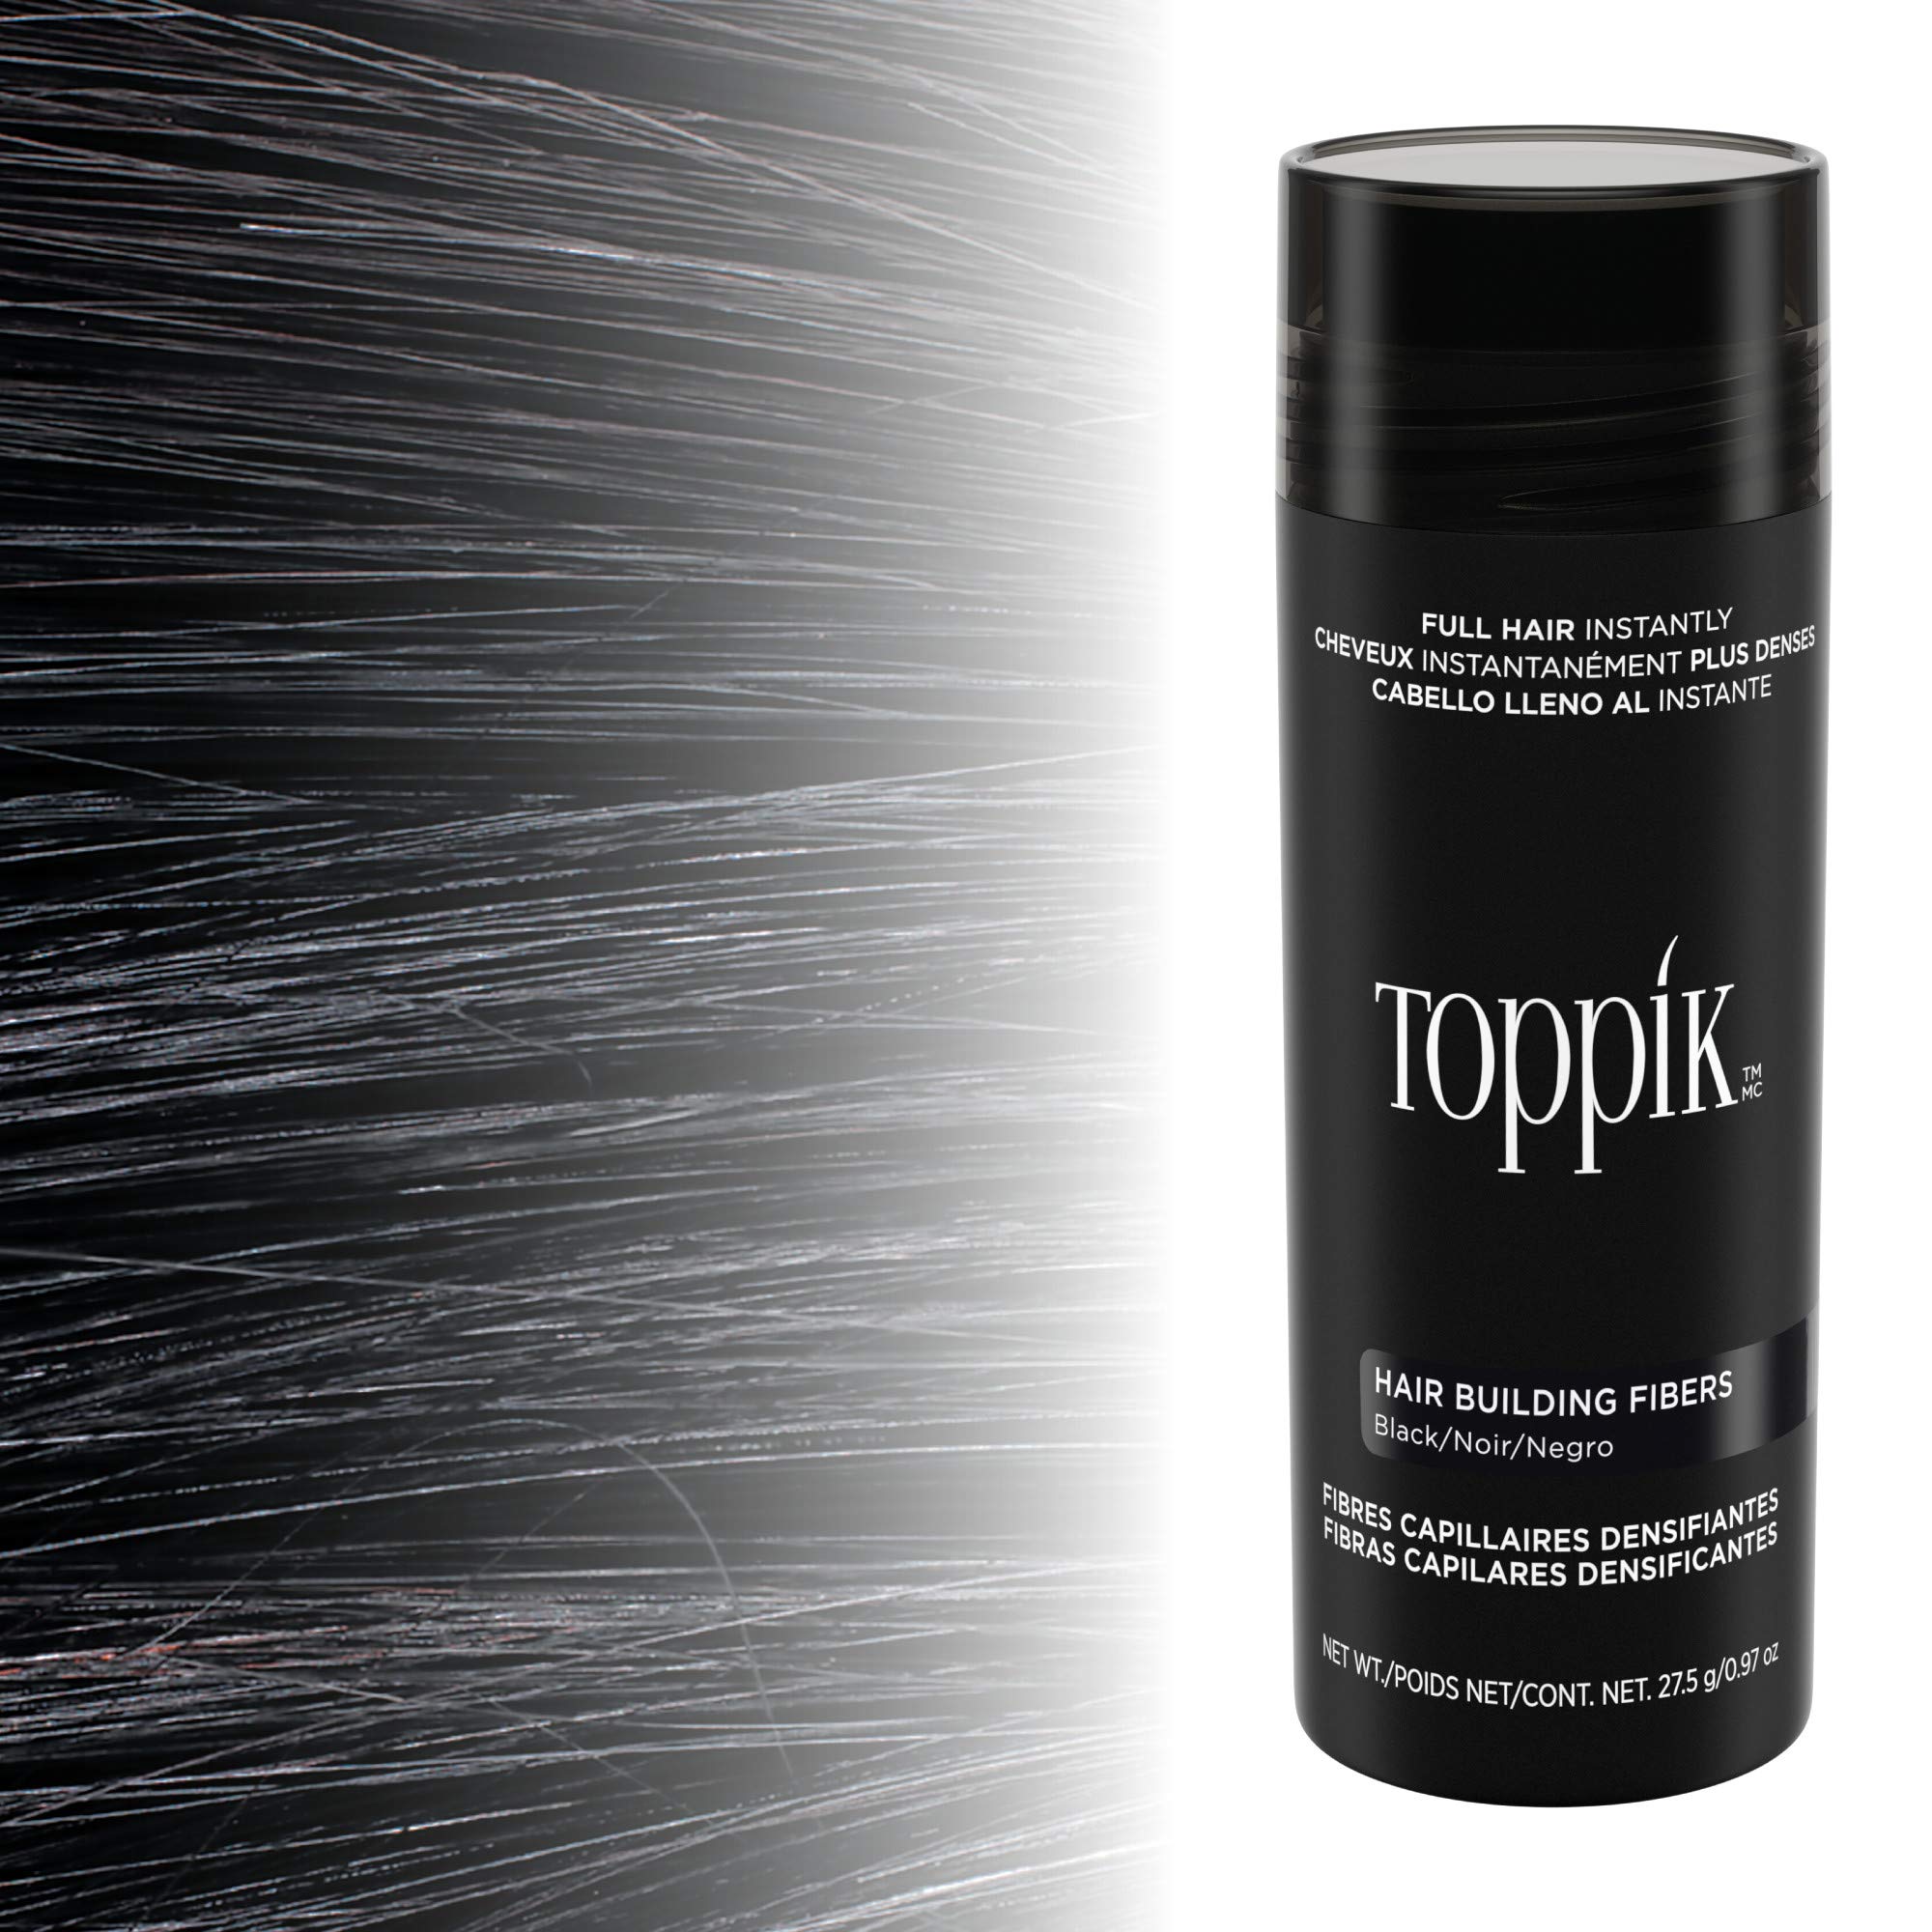 Toppik Hair Building Fibers, Medium Blonde, 3g Fill In Fine or Thinning Hair Instantly Thicker, Fuller Looking Hair 9 Shades for Men Women